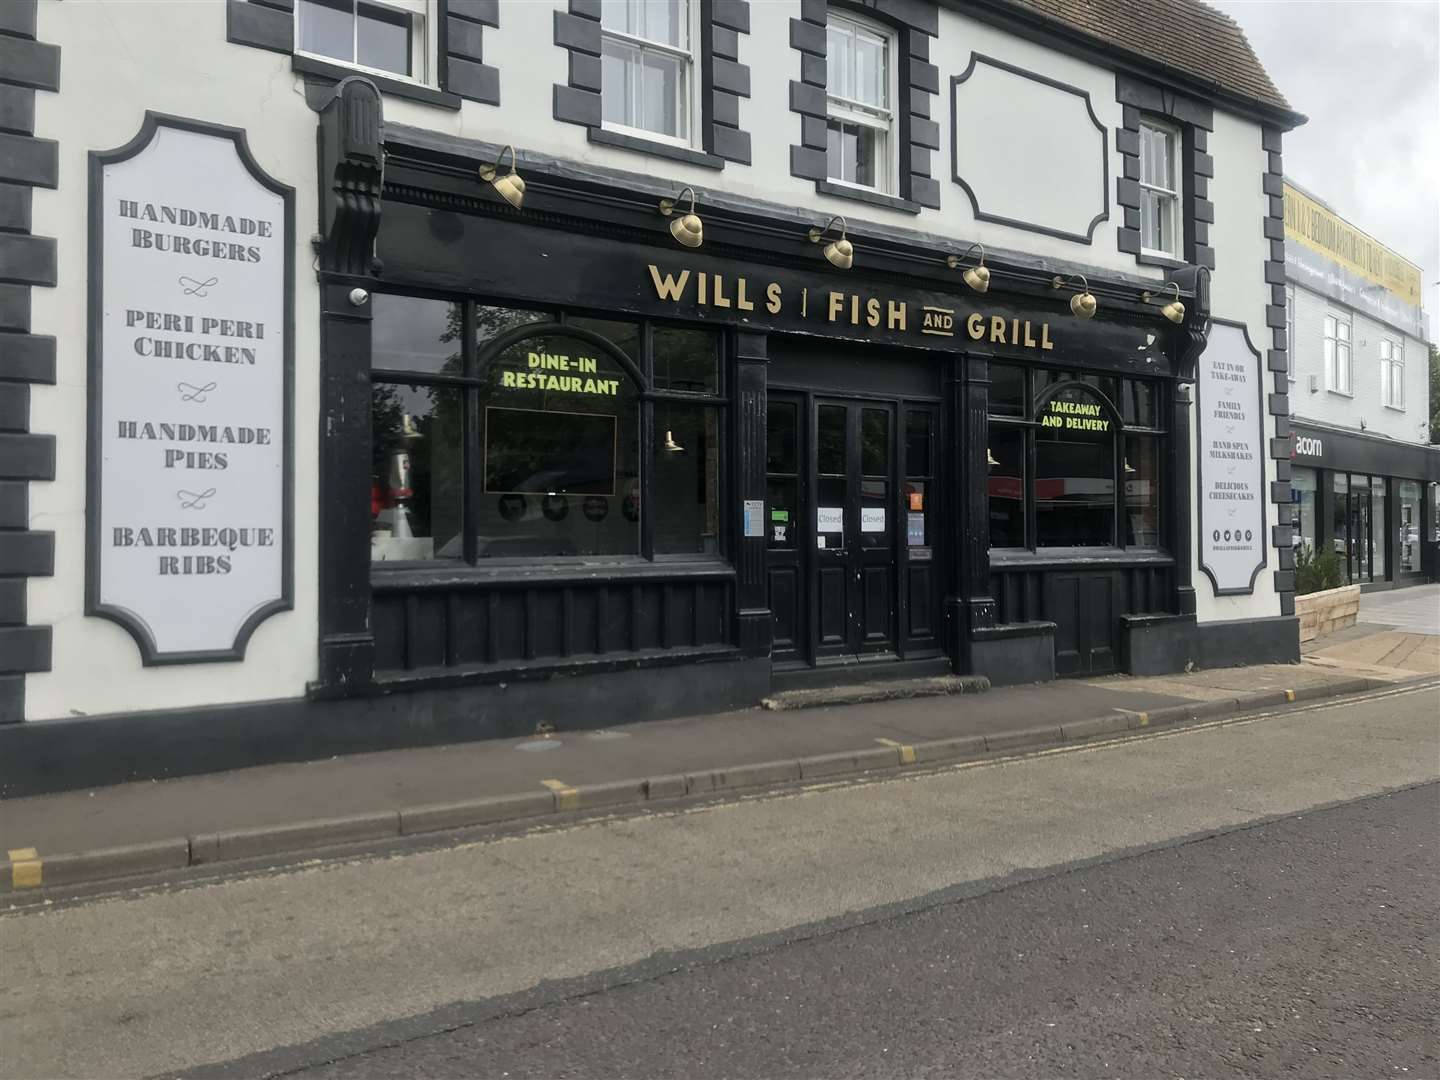 Will's Fish and Grill is now shut